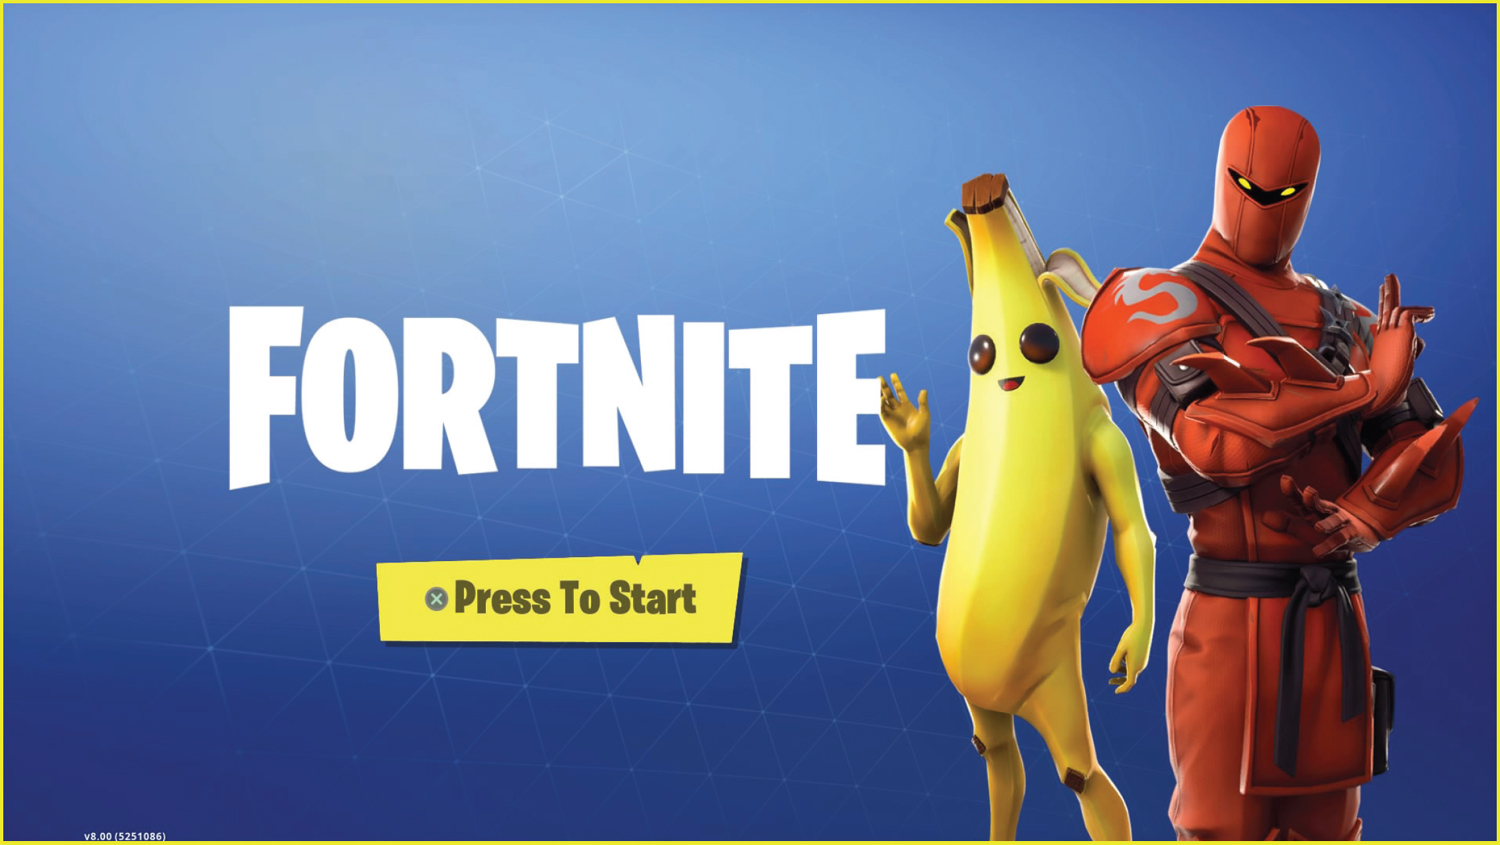 Get ready to experience Fortnite Battle Royale one of the most popular games - photo 4